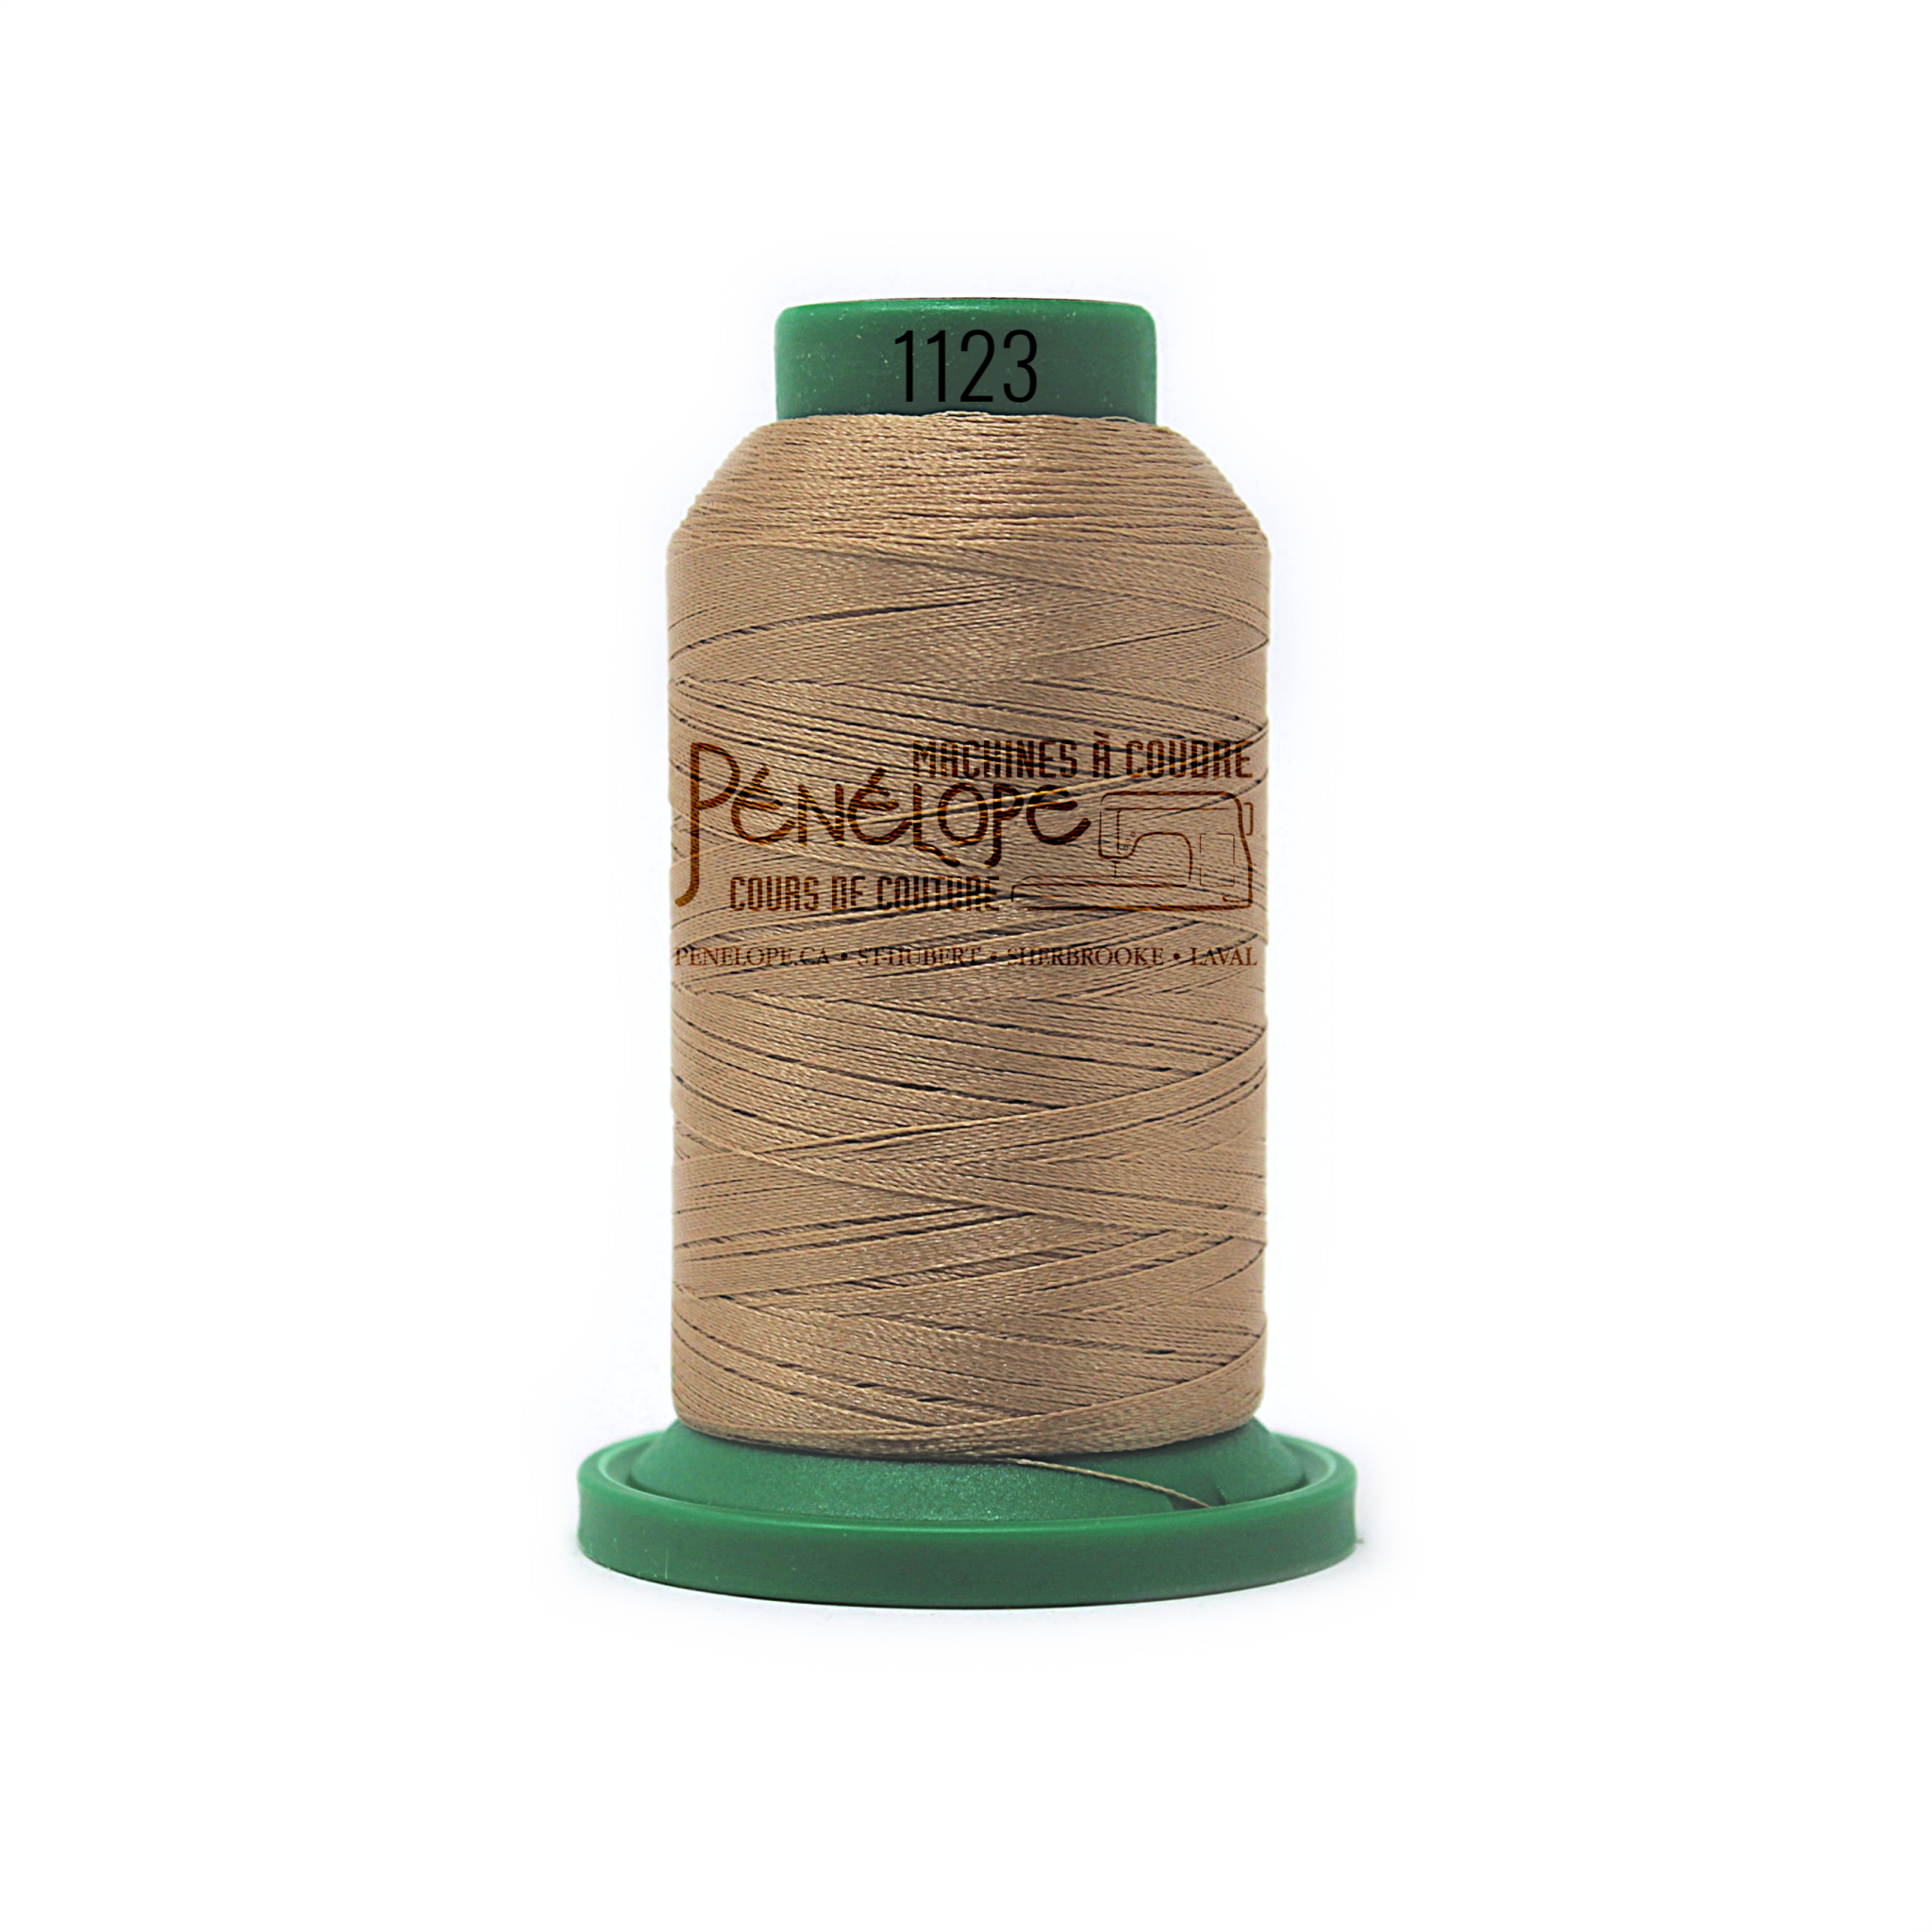 Isacord Isacord sewing and embroidery thread 1123